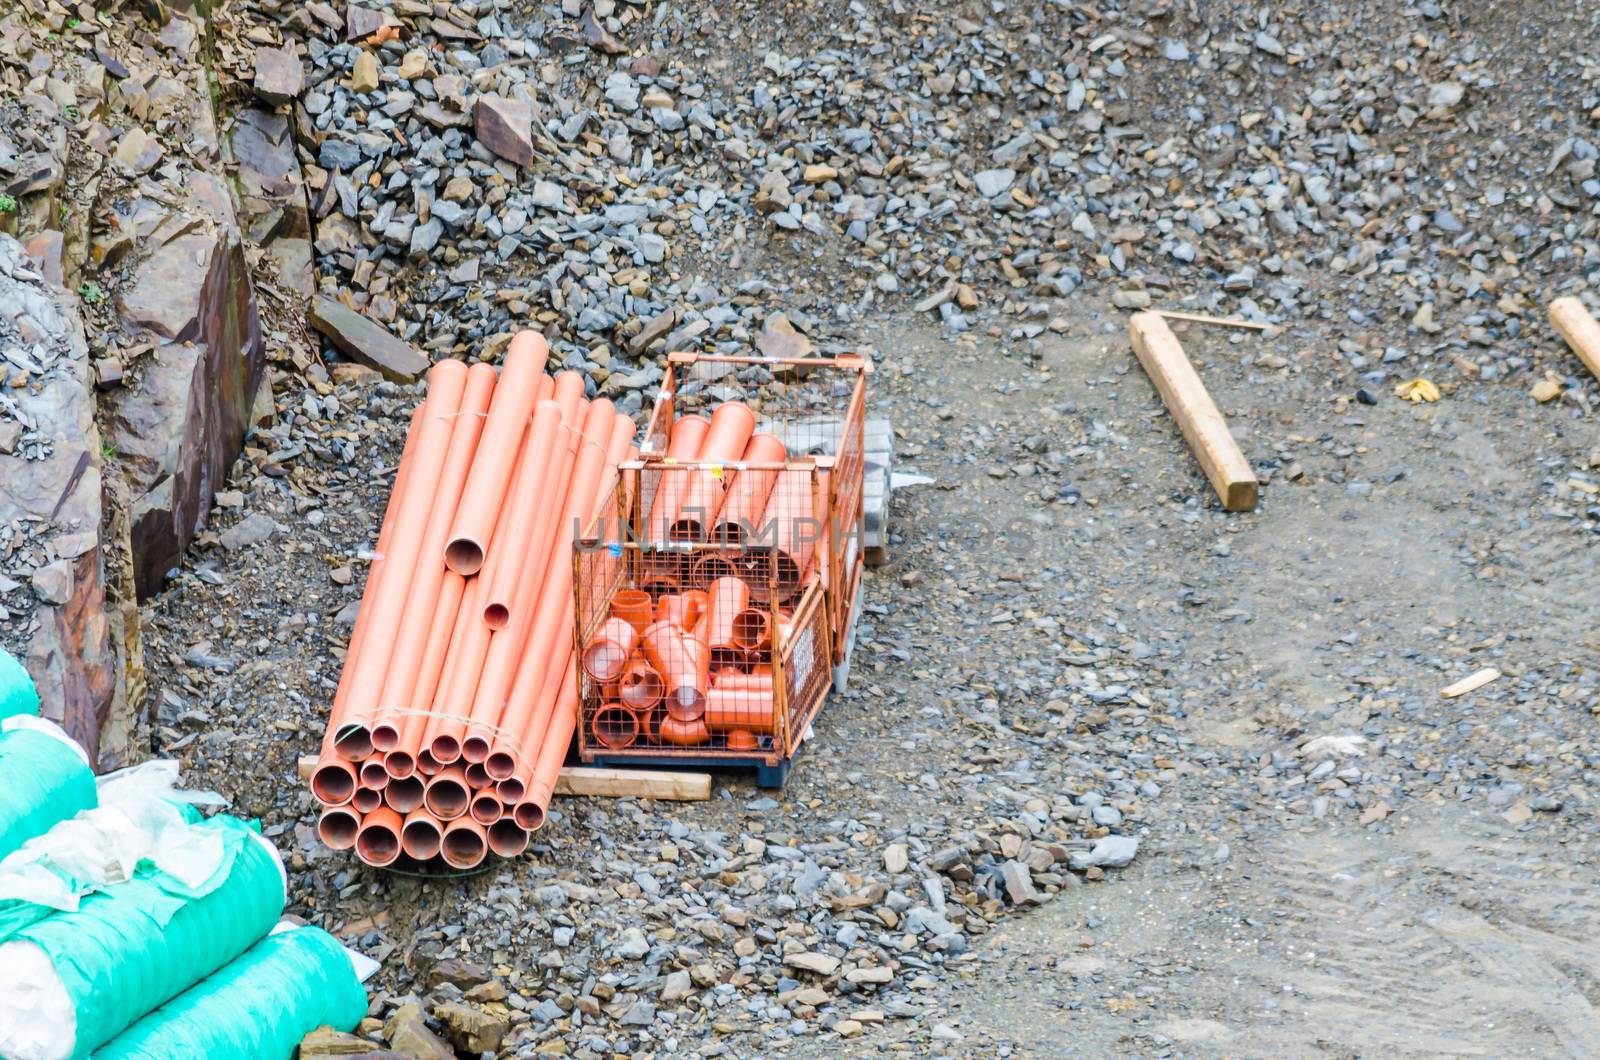 A pile of red drain pipes on a construction site